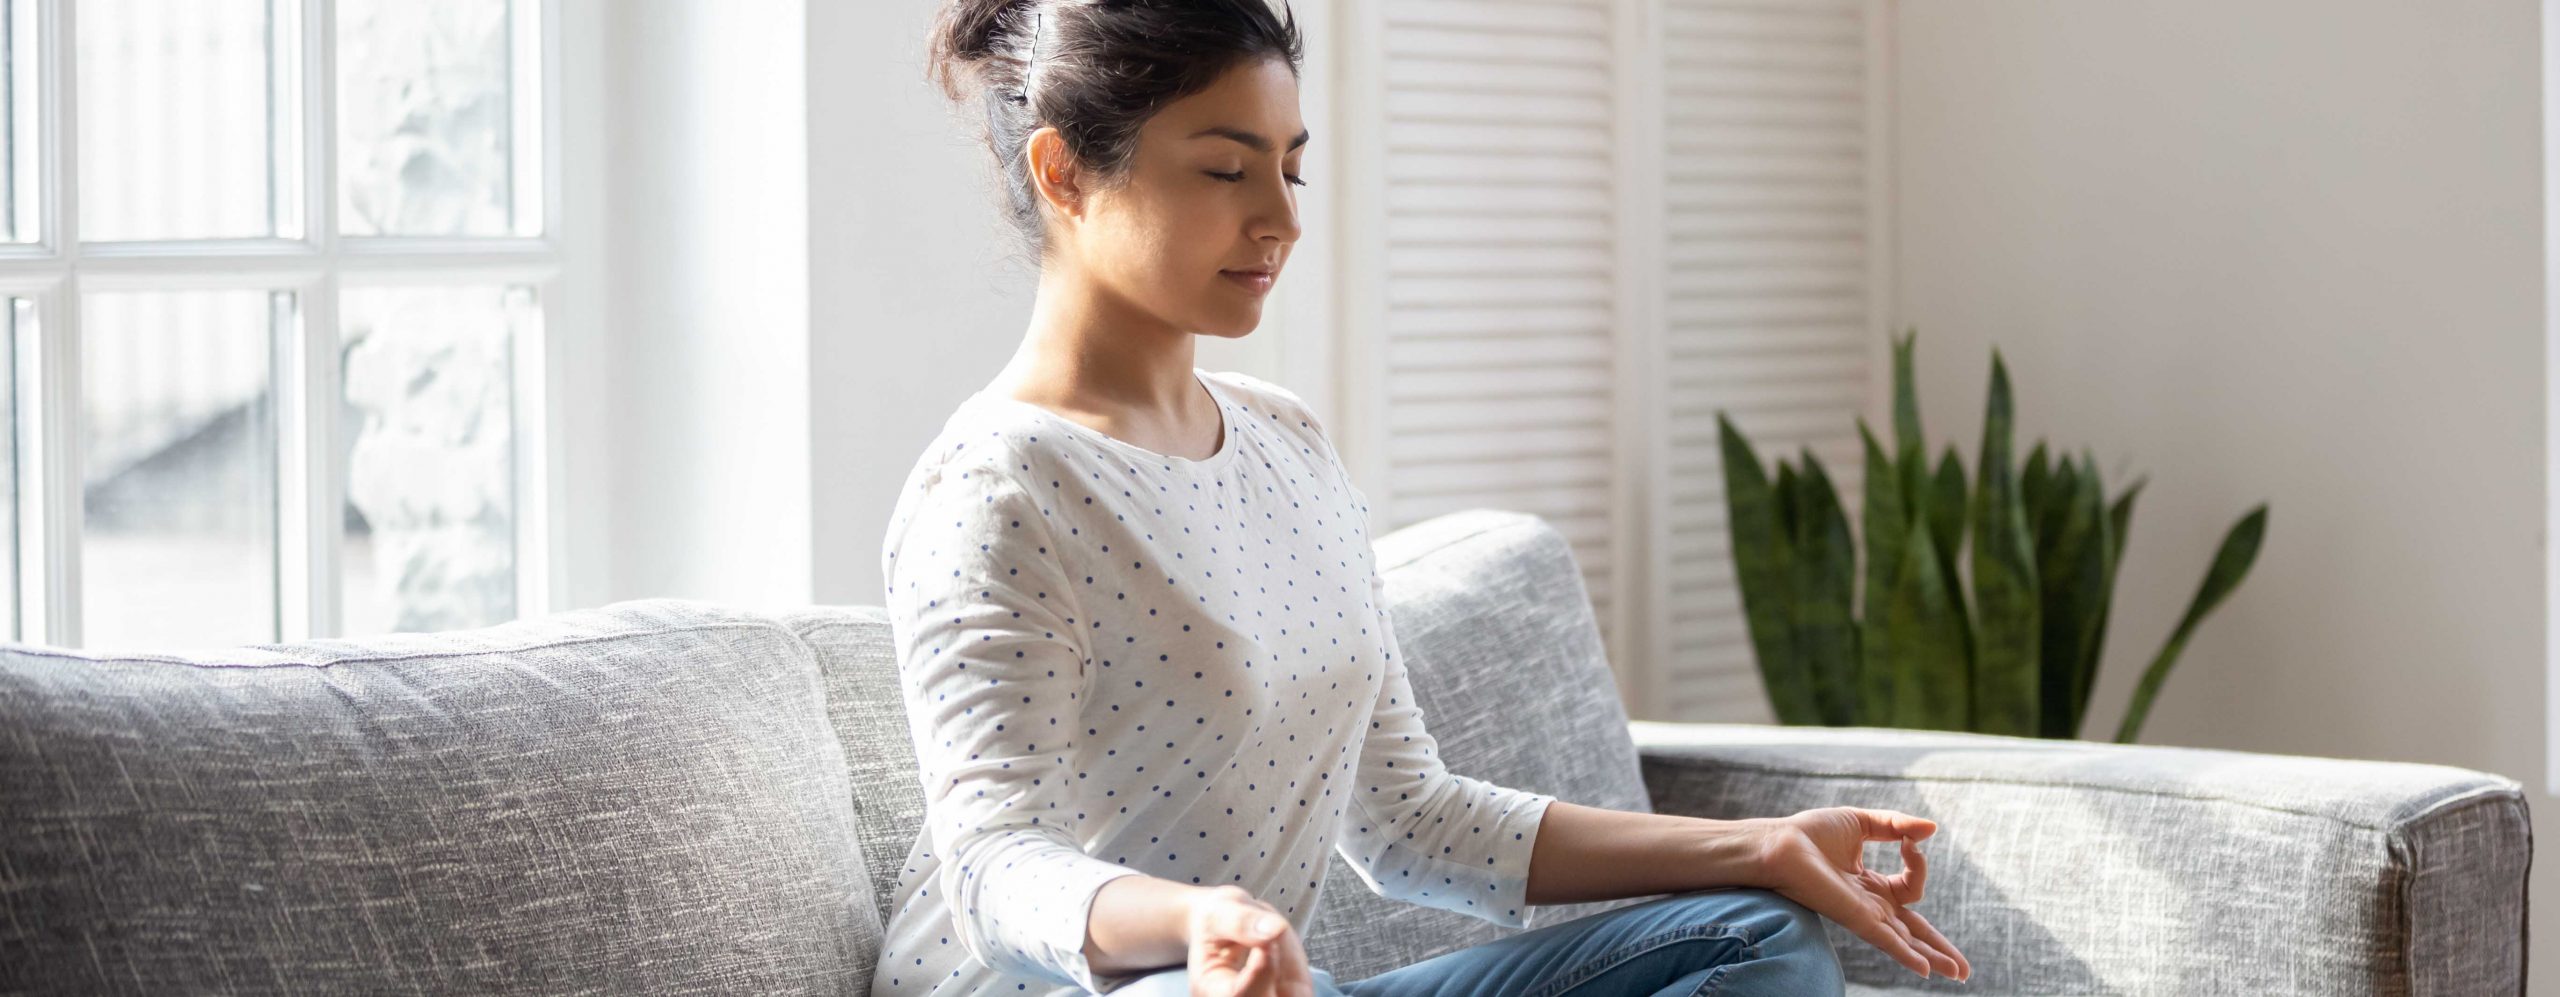 Woman with Good Posture Doing Breathing Exercises